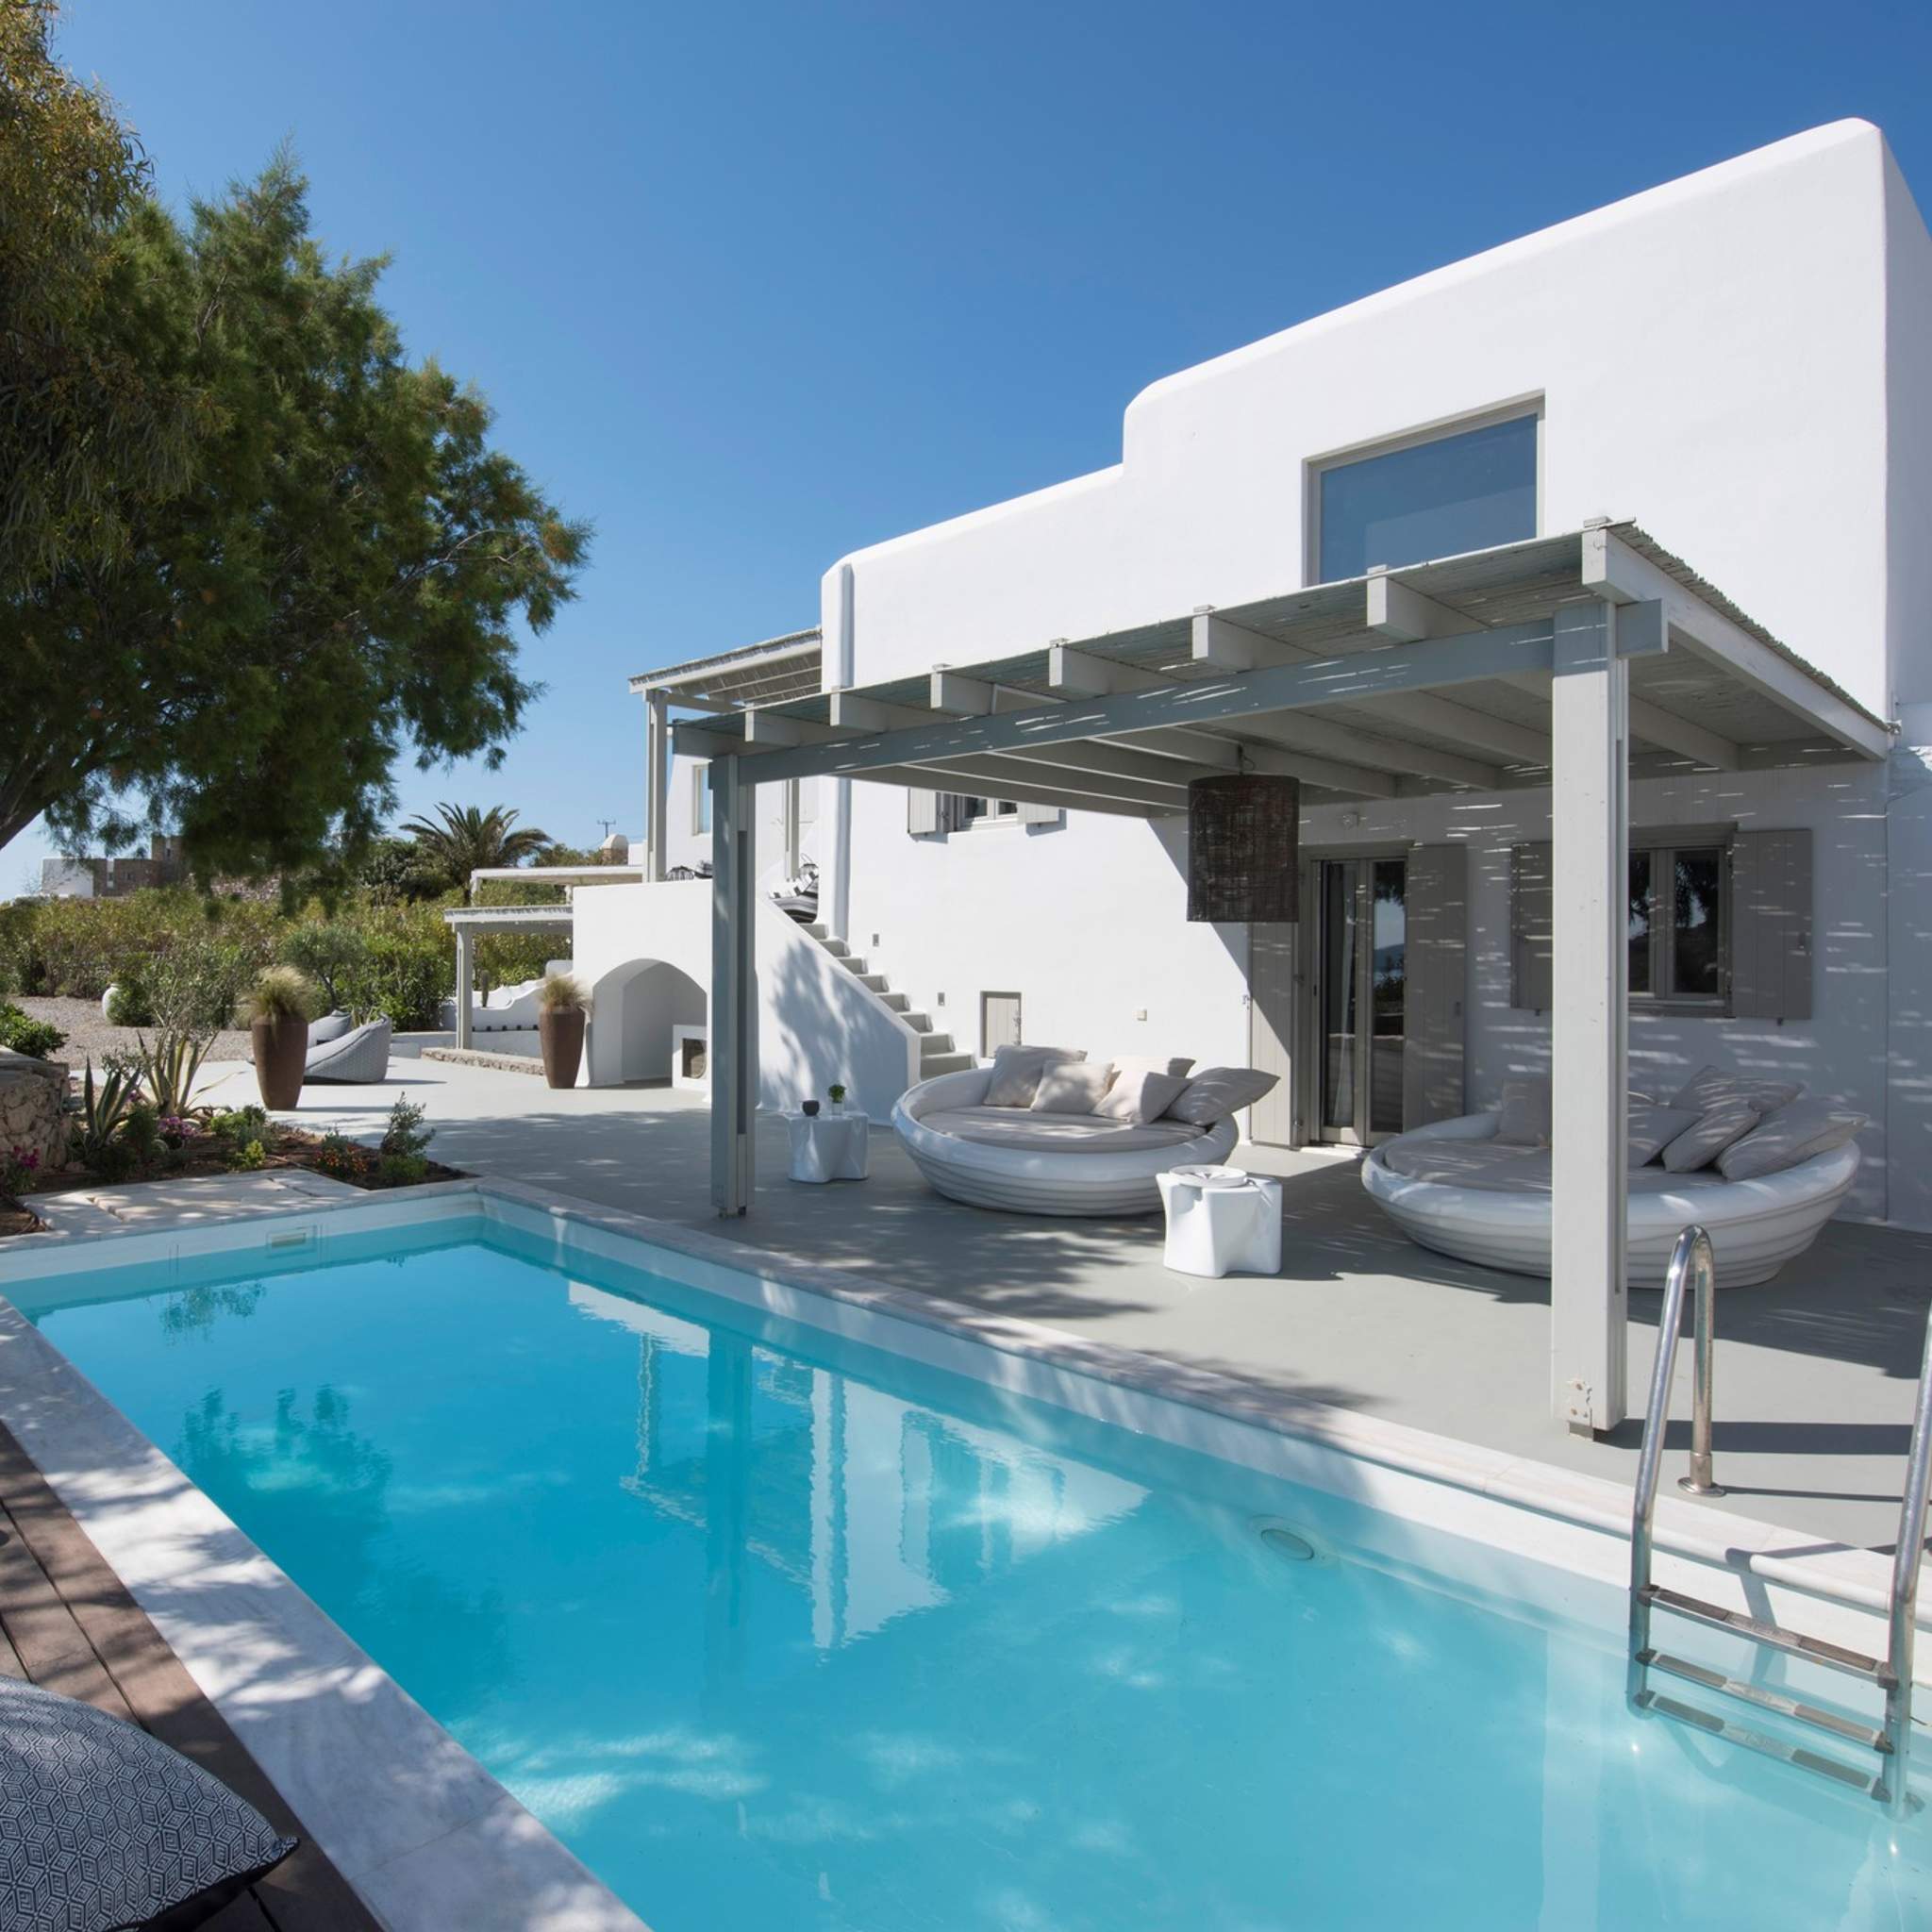 Dafni. Escape to a world of pure luxury at Villa Dafni in Mykonos. Immerse yourself in breathtaking views of the Aegean Sea, lounge by your private pool, and let the turquoise waters soothe your soul.
.
#amalgamhomes #artofcomfort #greece #visitgreece #greekislands #cyclades #greekislands #paros #naxos #mykonos #tinos #ampelas #kastraki #triantaros #travel #wanderlust #greeksummer #discovergreece